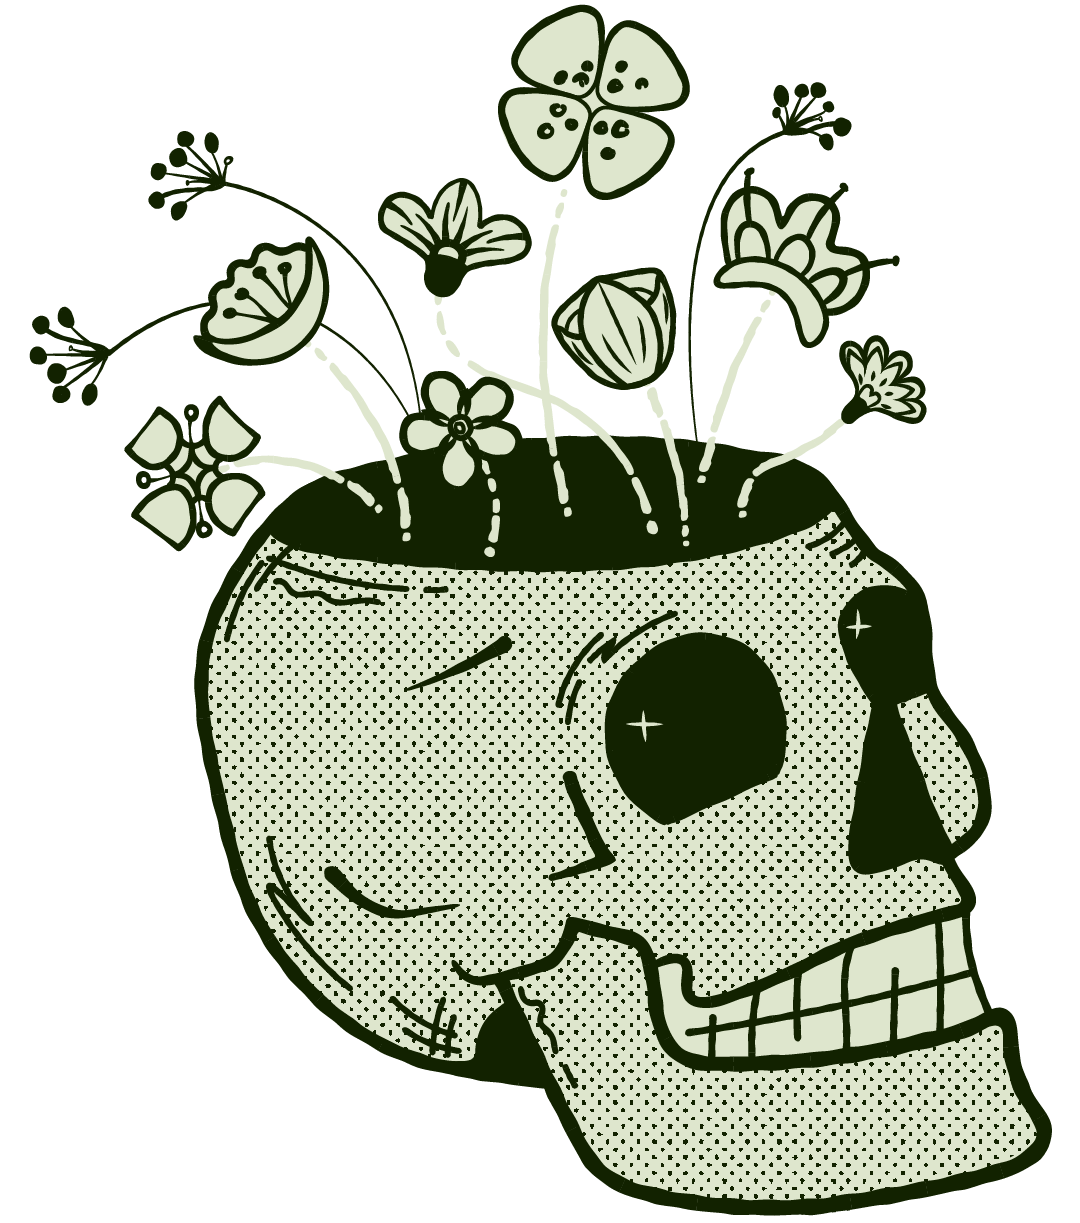 illustrated retro cartoon skulls with top removed and retro stylised flowers growing. light green with a heavy dark green outline, illustrated cross-hatchings and line marks, and a half tone finish.